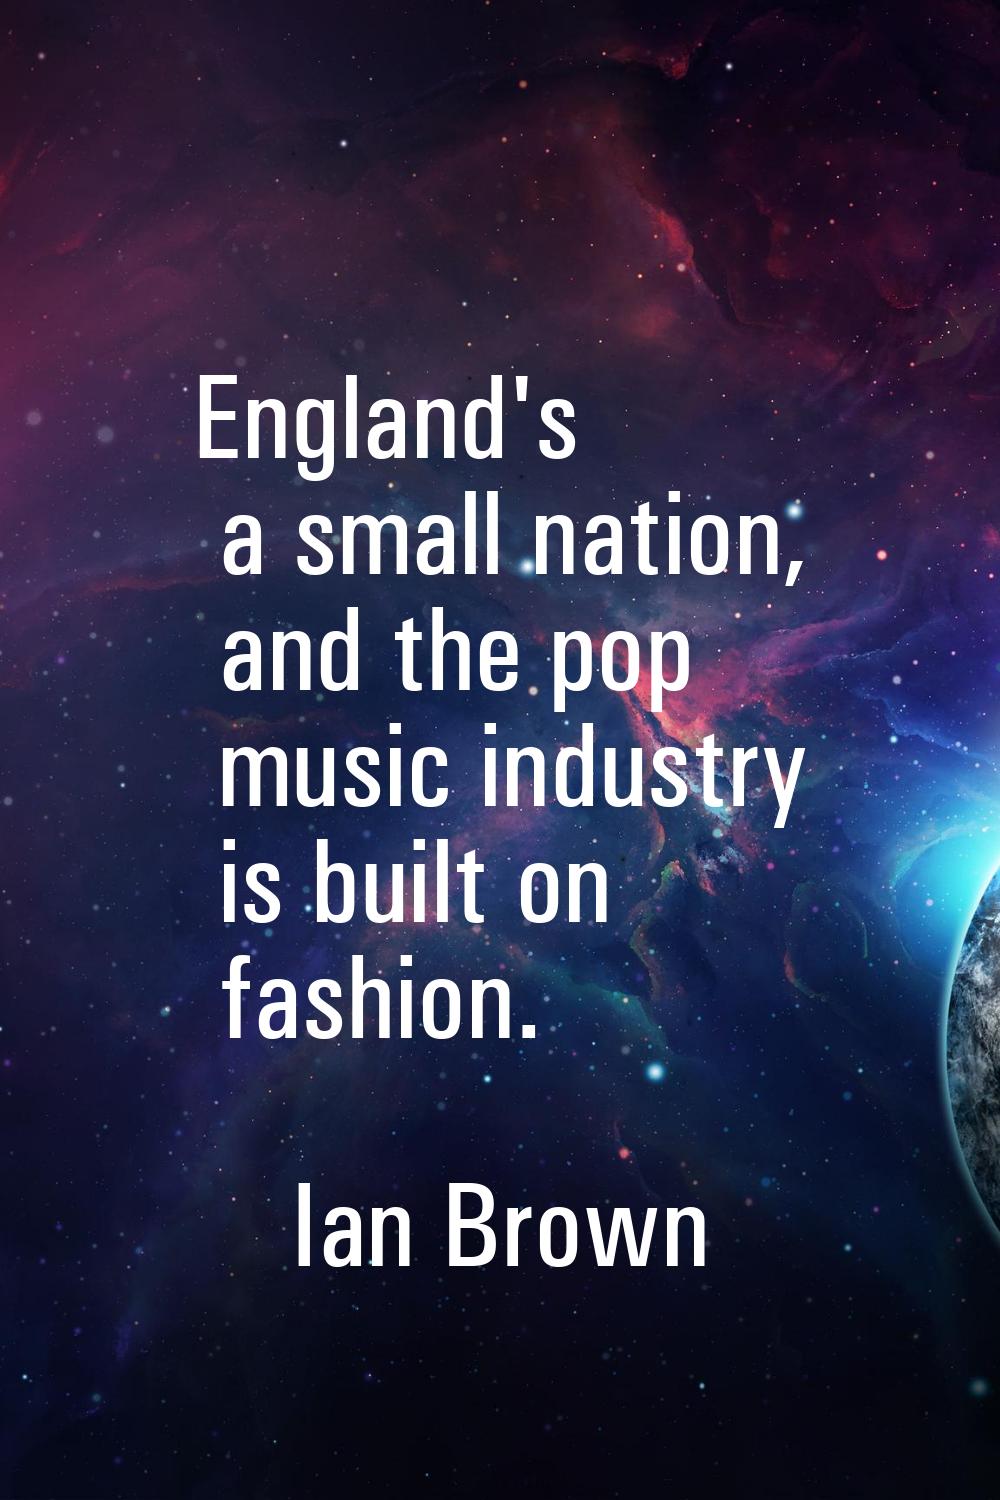 England's a small nation, and the pop music industry is built on fashion.